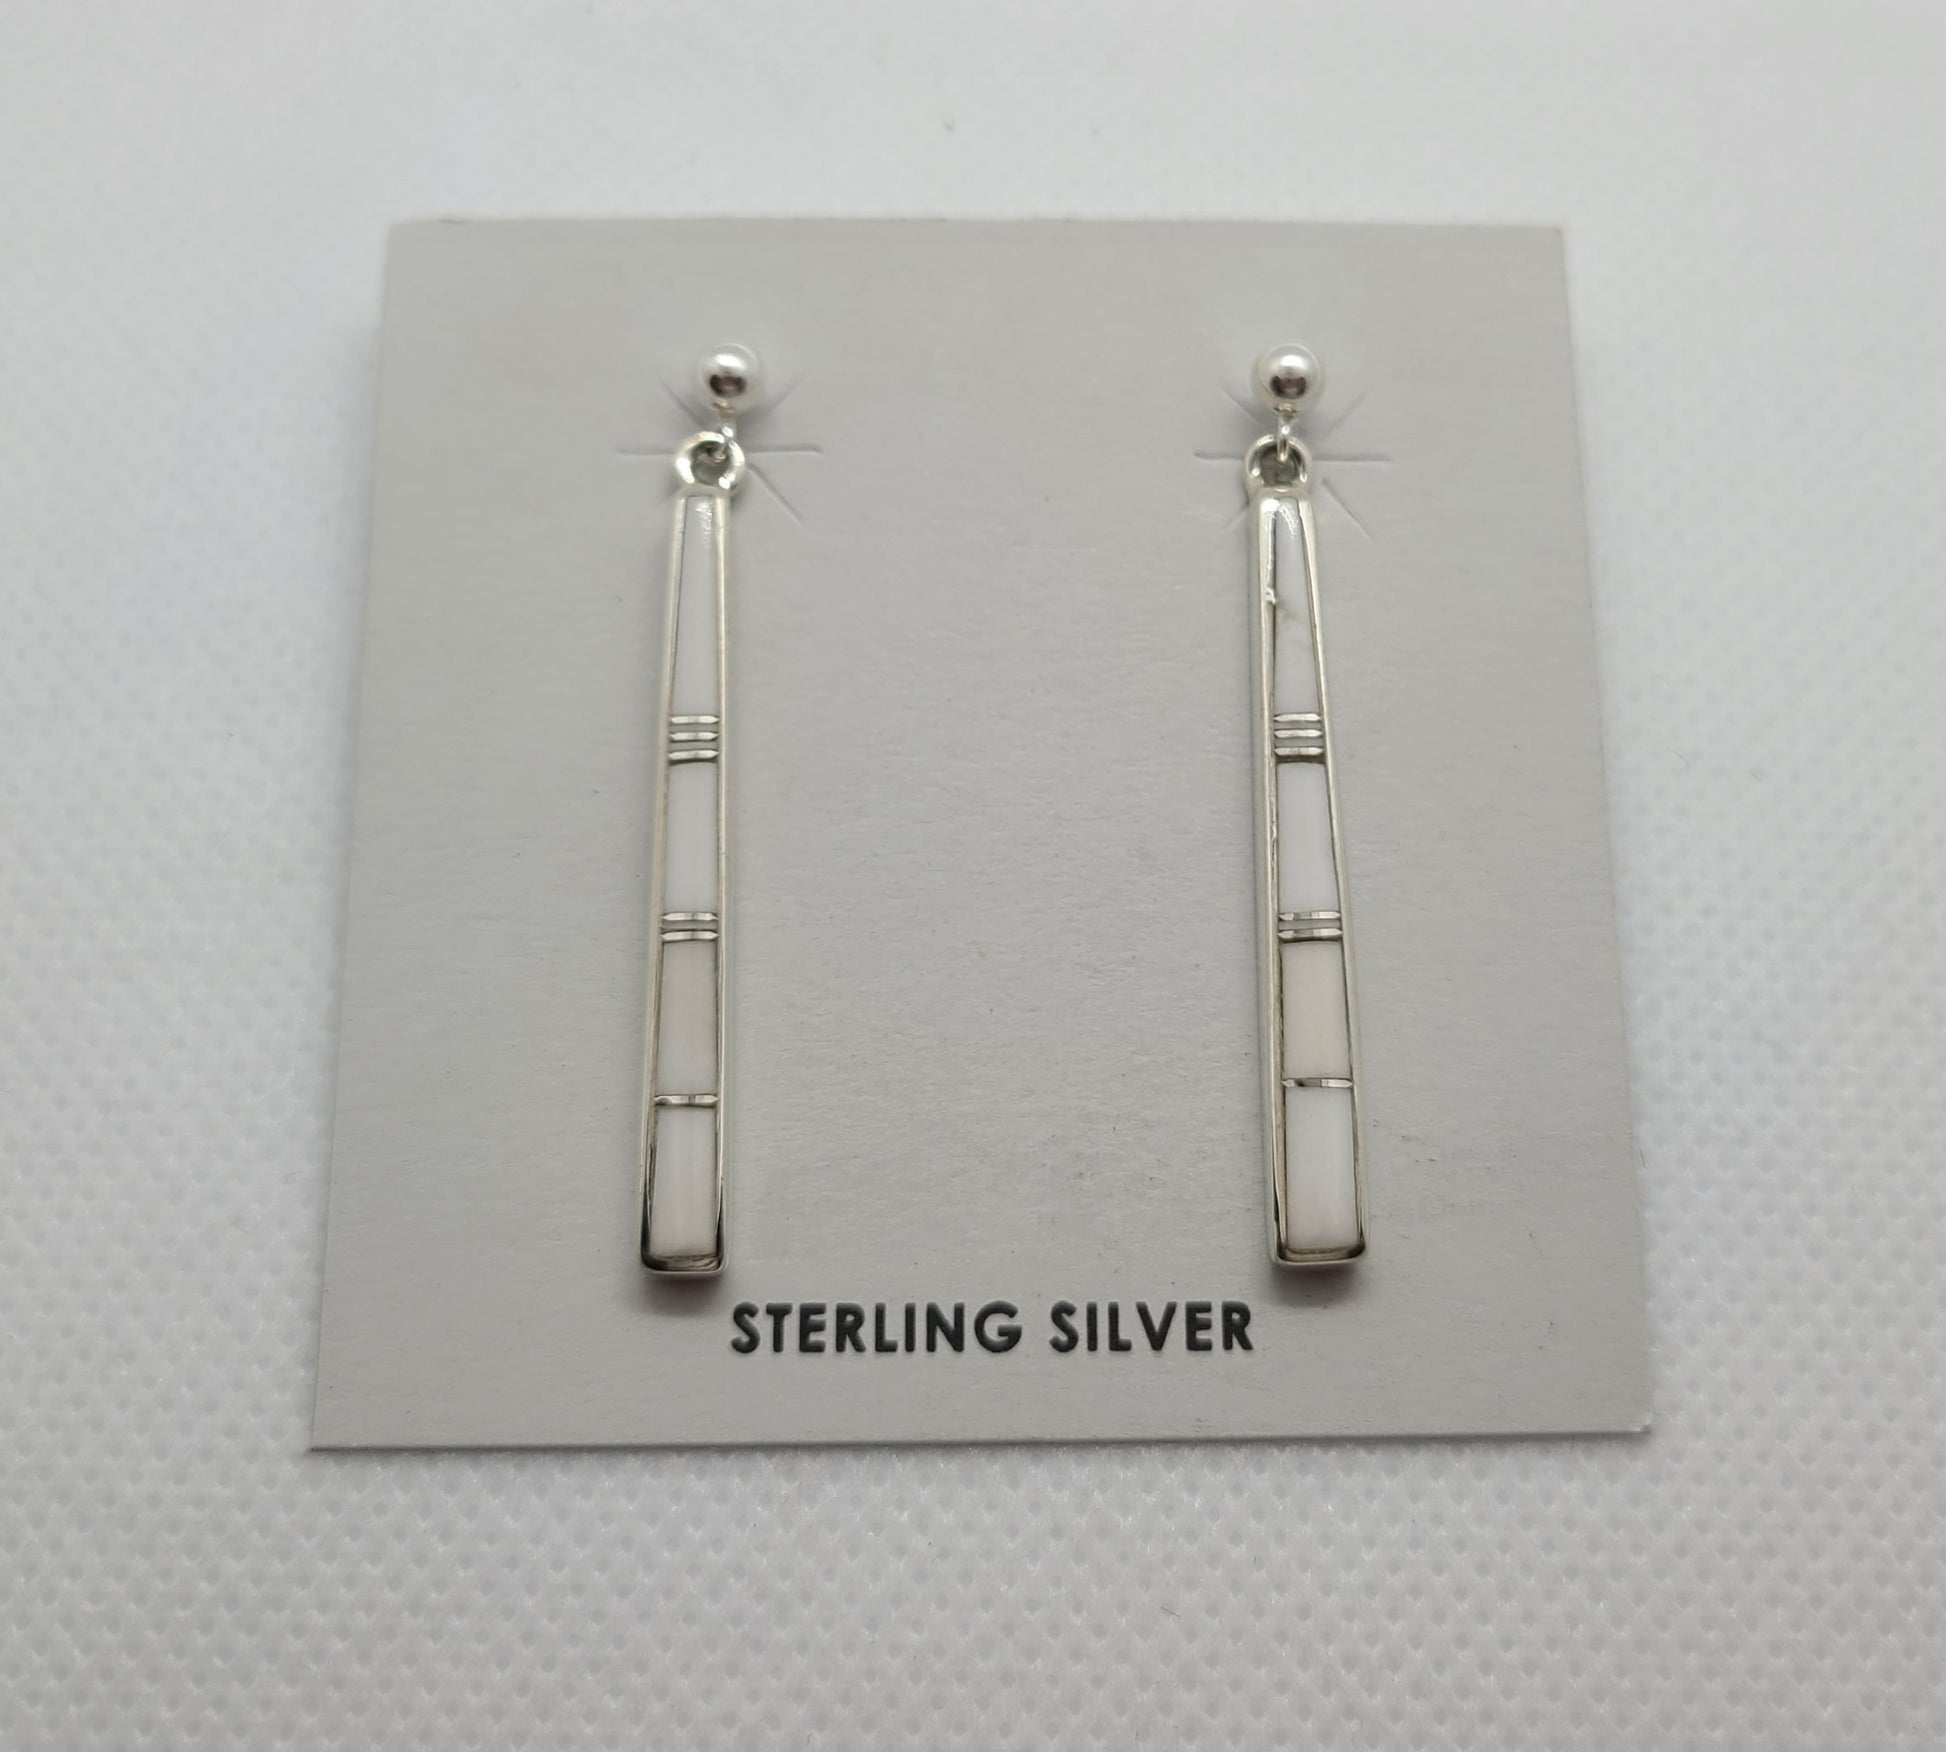 These earrings are stick like, White Buffalo stone inlaid in Sterling Silver with small slivers of silver between the stones.  Mostly pure white with a very small amount of matrix. Approximately 1.5 inches long. Navajo artist Rick Tolino. Comes with Certificate of Authenticity.